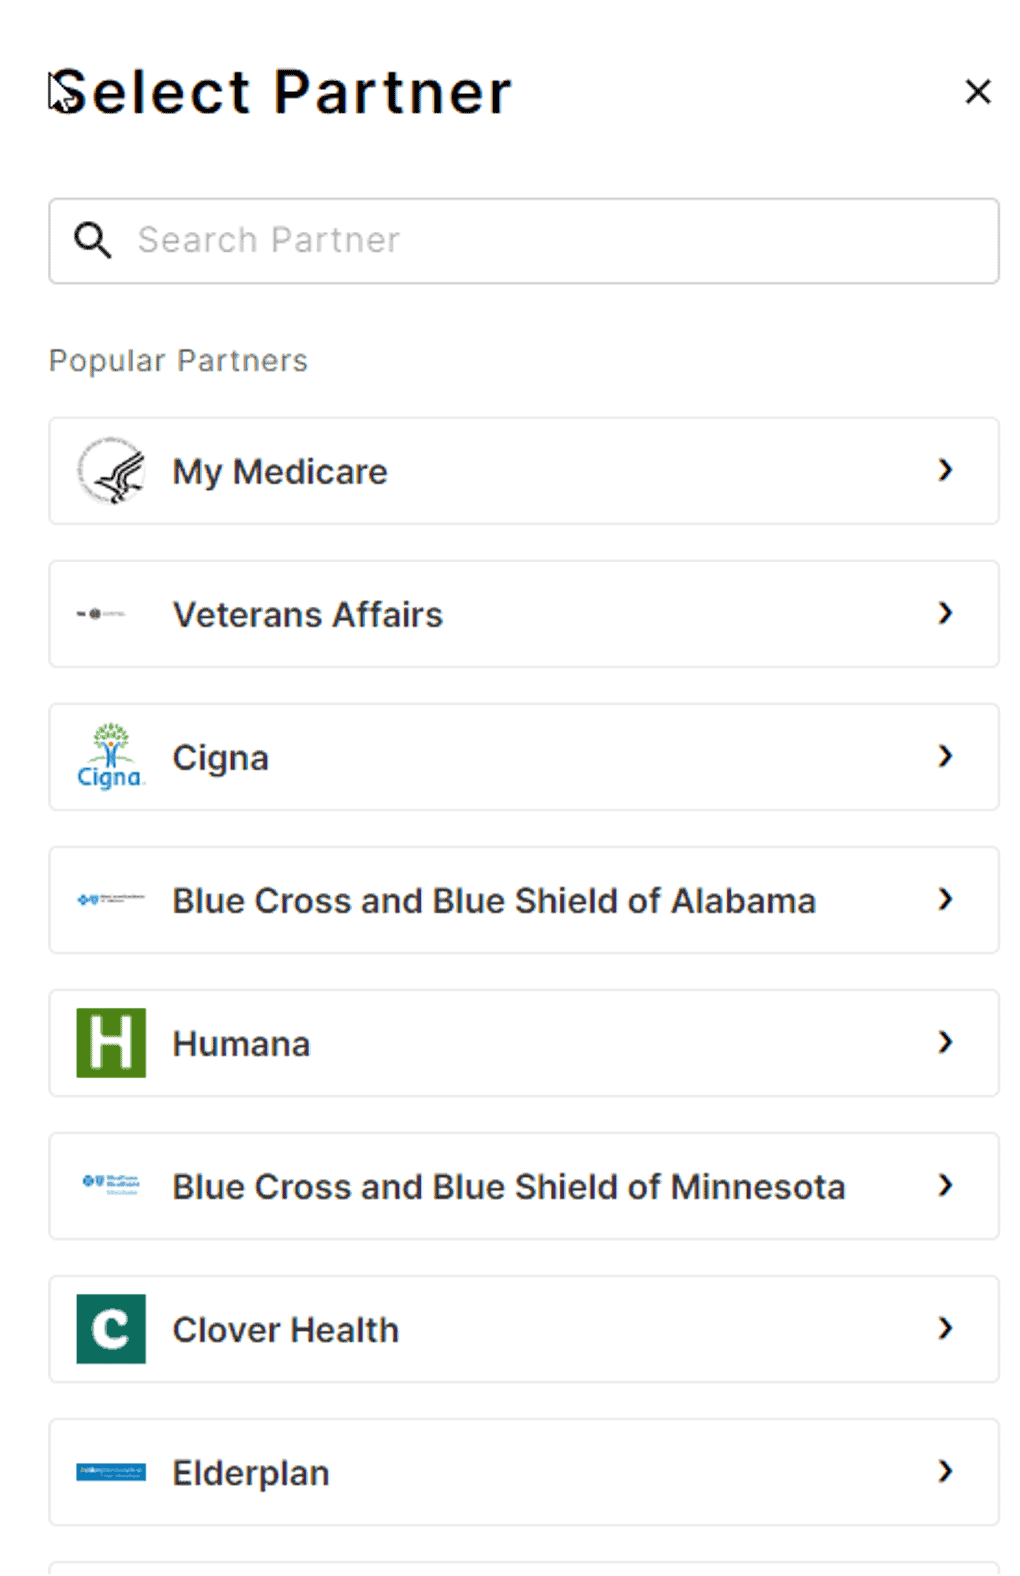 Selection screen with a search bar and different health system options, including Elderplan